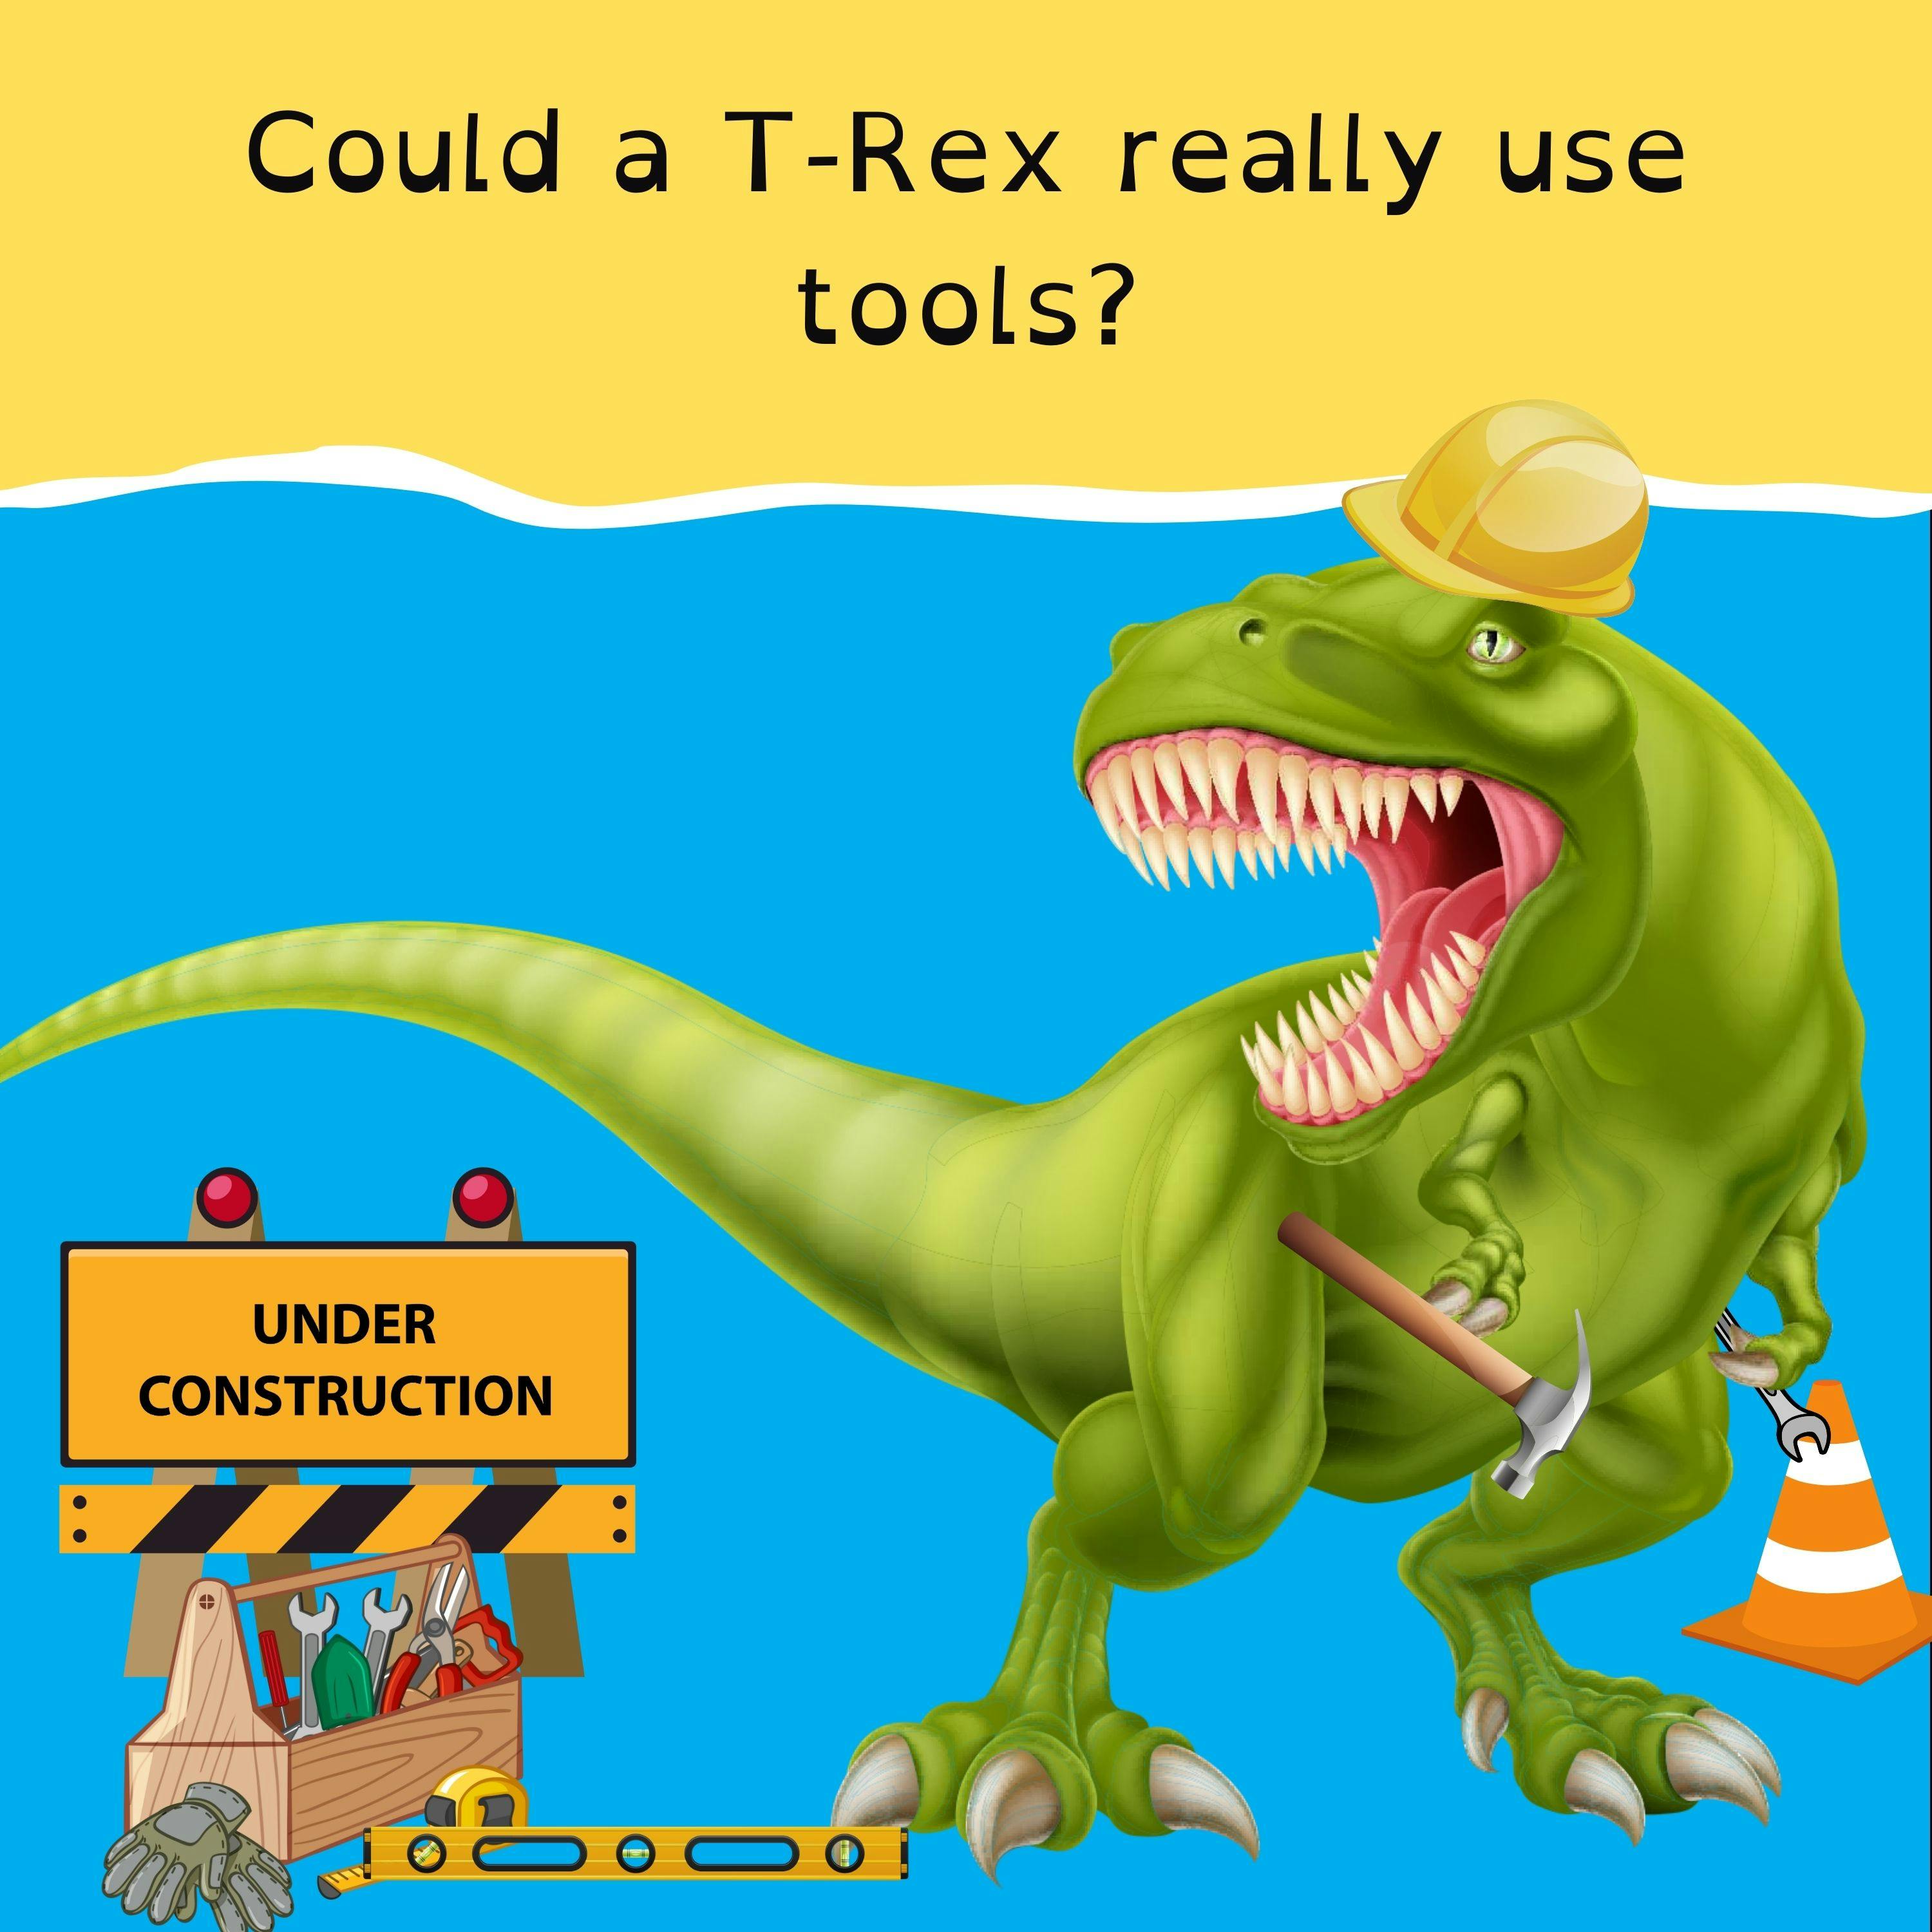 T-Rex tool theory busted; Wisconsin bus hero saves the day; a ‘shear’ genius’ world record; and repercussions for rankings.